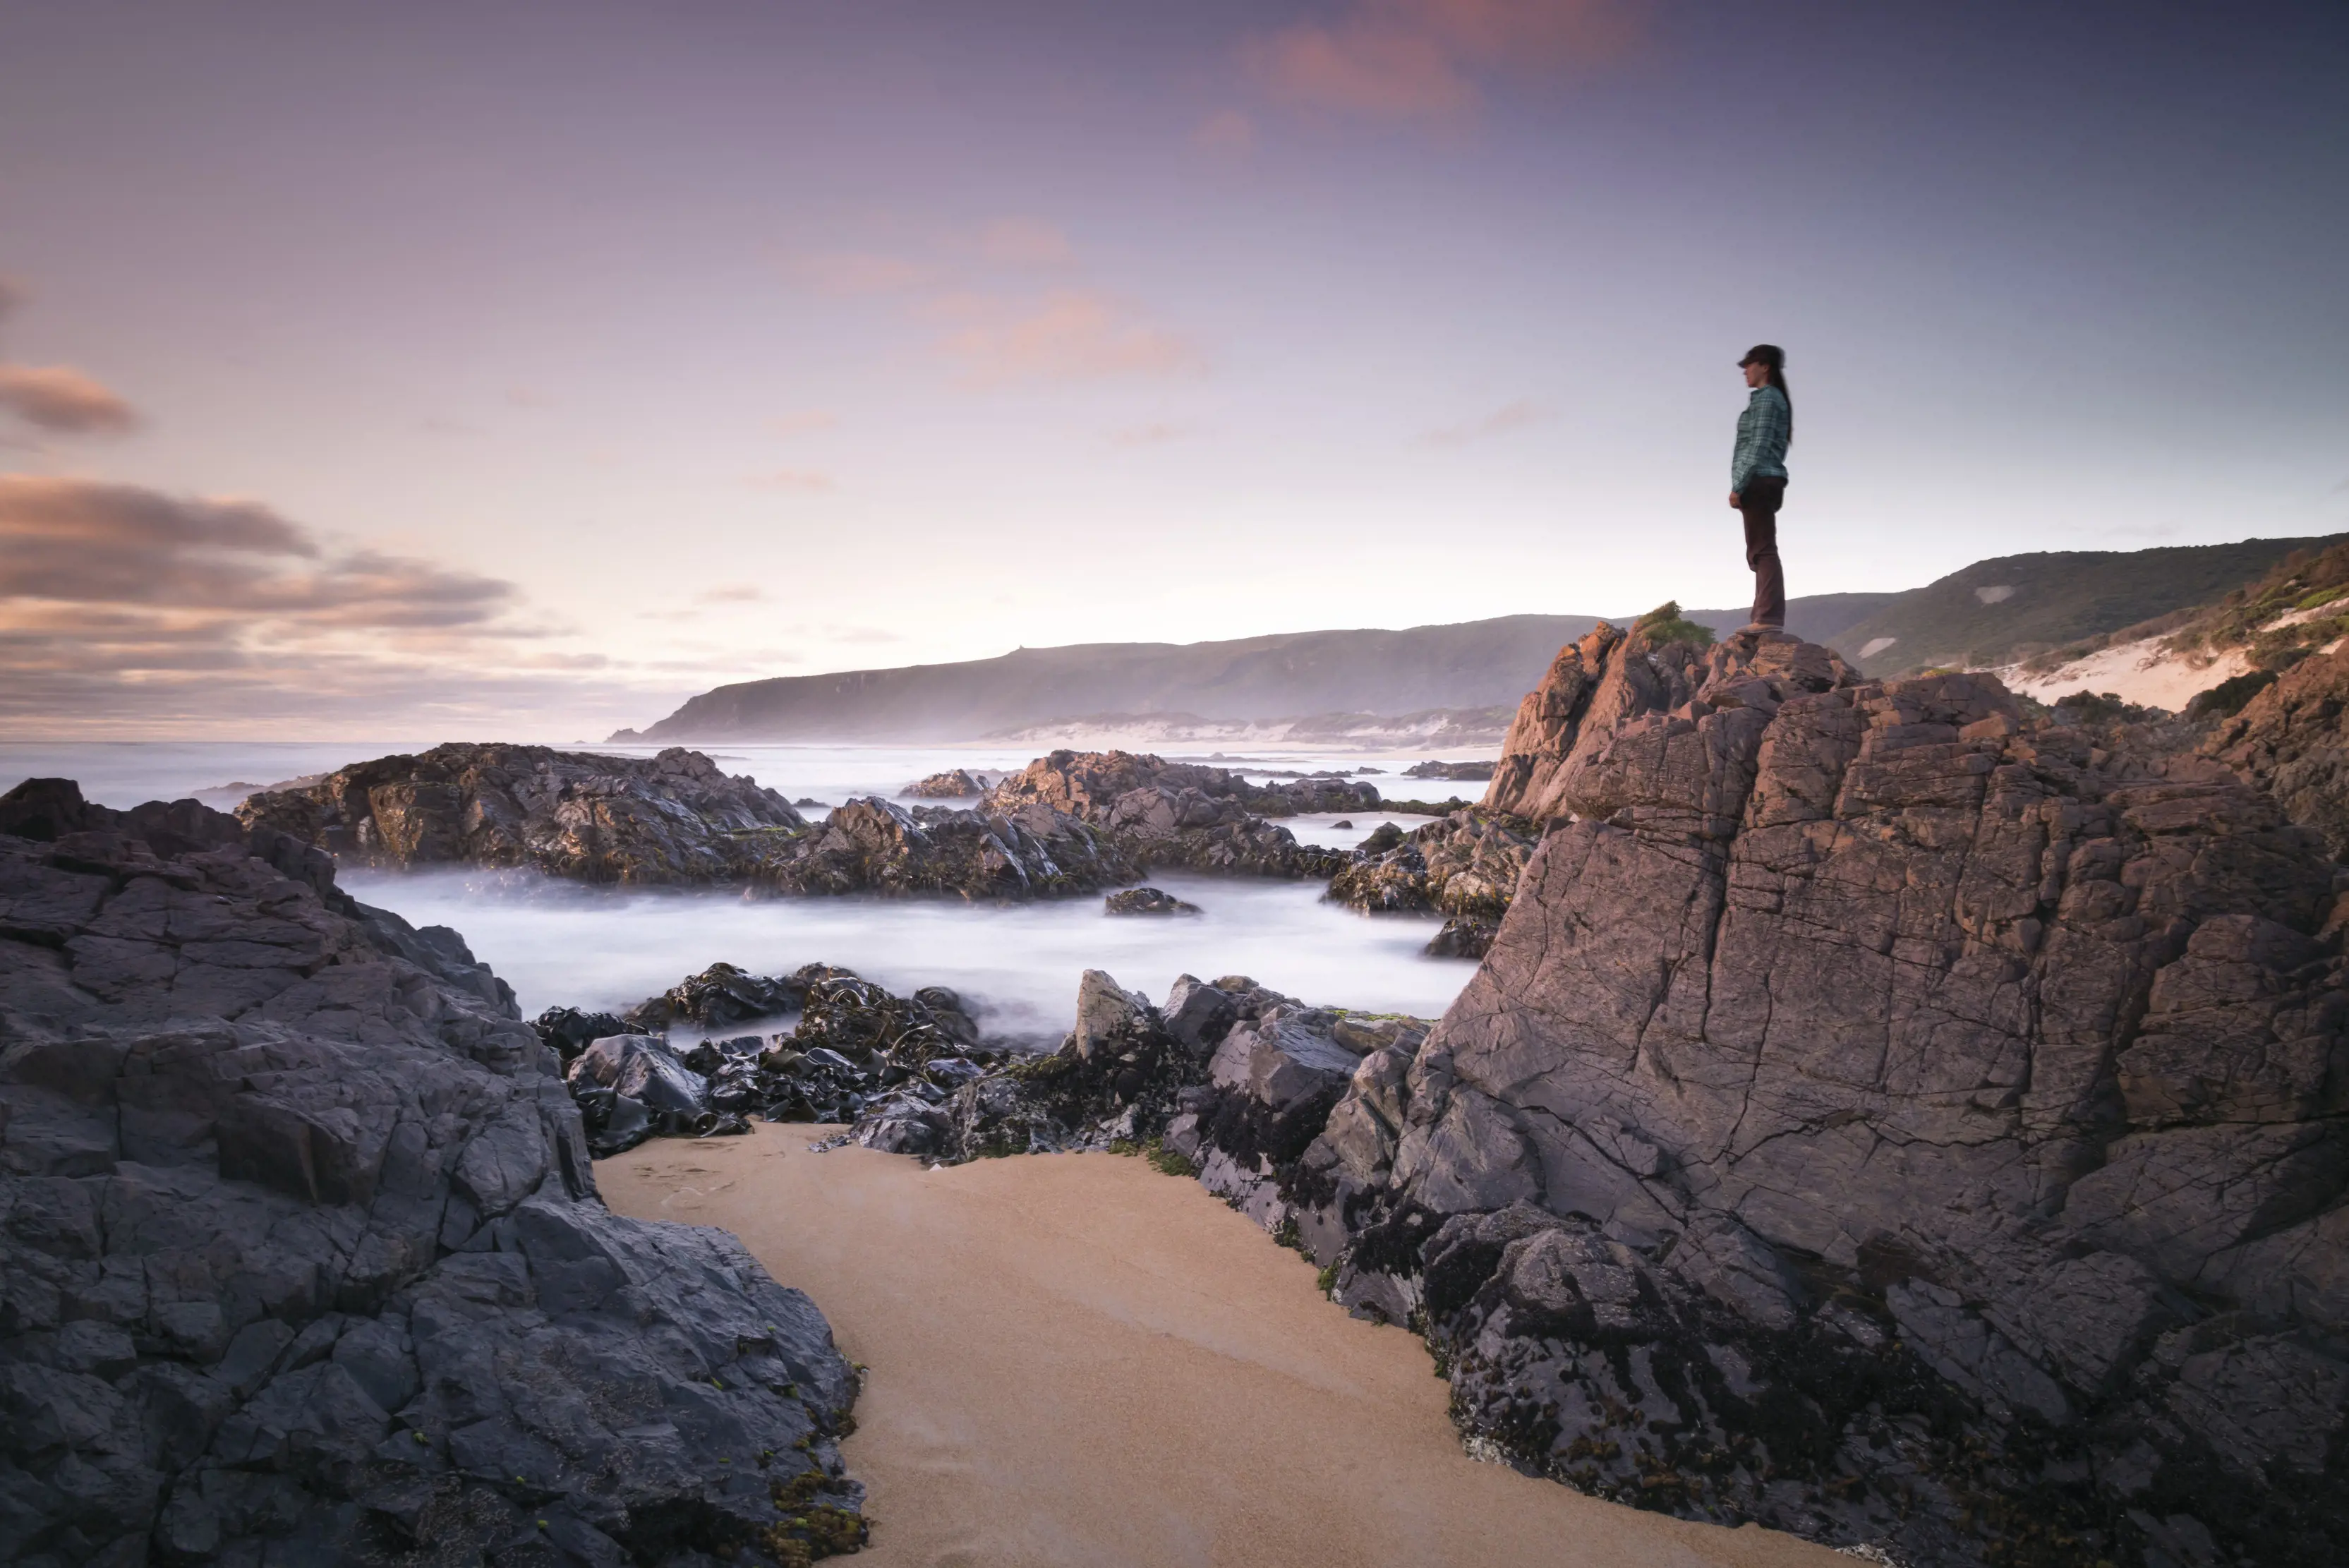 Spectacular landscape image of a person standing on a rock, overlooking the picturesque Trial Harbour, located in the northern part of Ocean Beach.